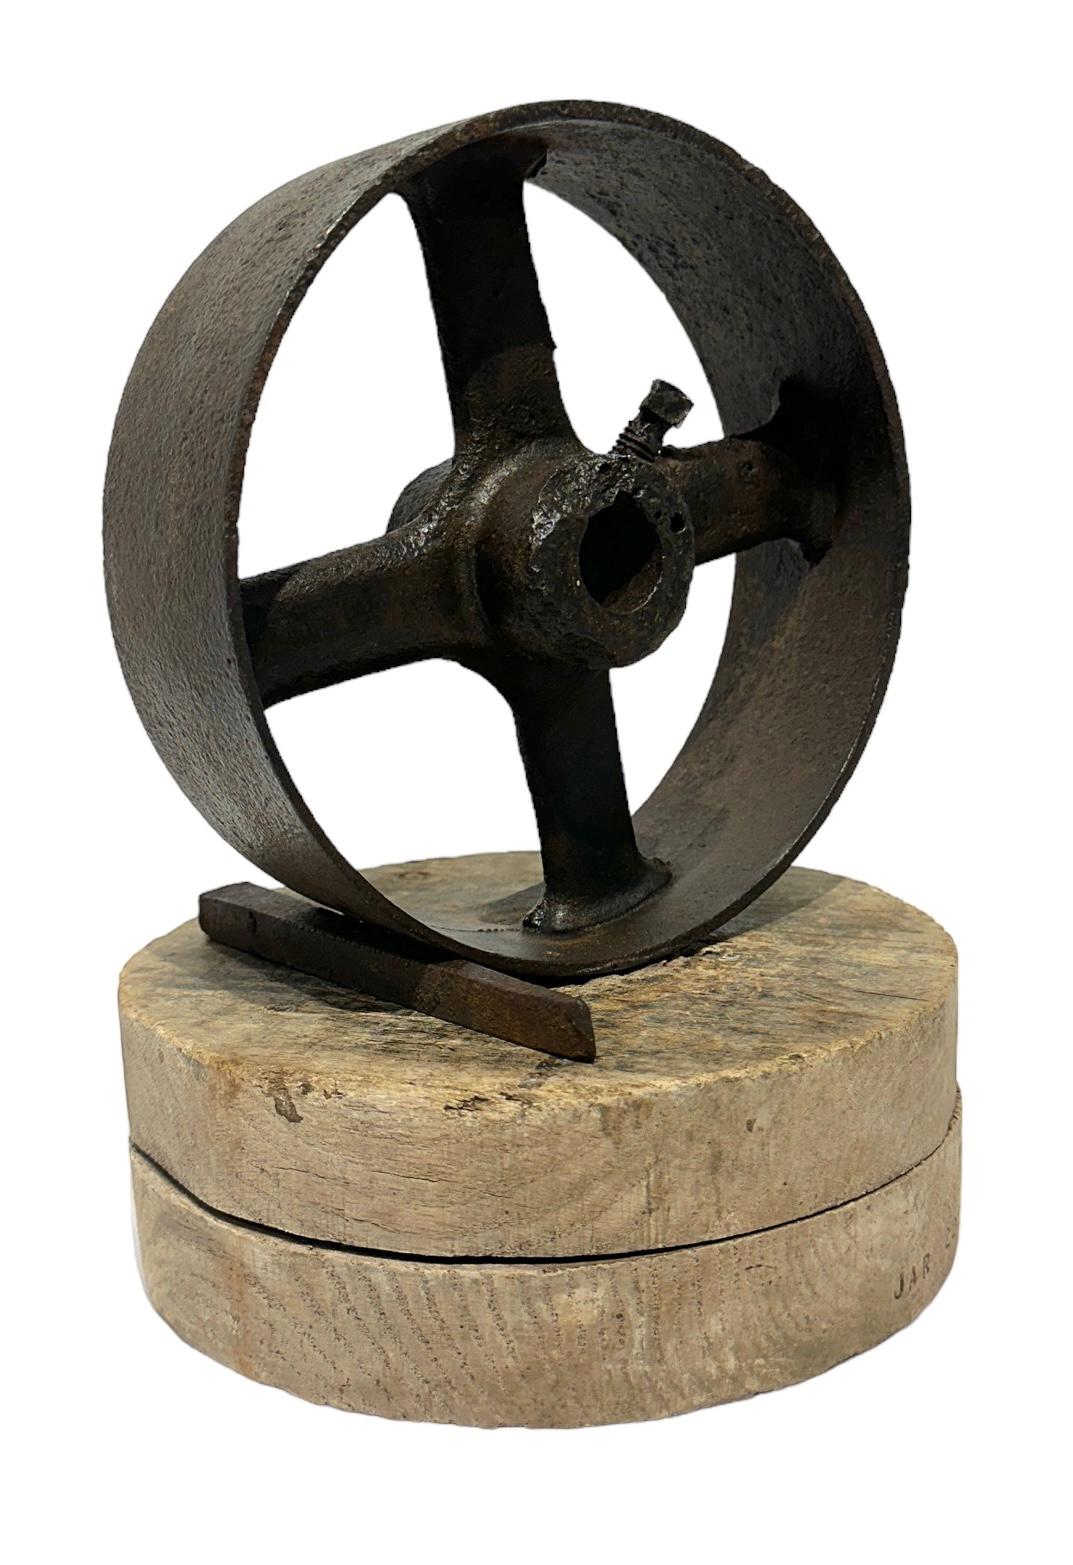 Jim Rose, known primarily for his steel furniture, was an avid collector and scoured salvage yards for unique, interesting items.  Here, a beautifully rusted wheel and a small wedge sit together atop a salvaged round wooden base. This aesthetically